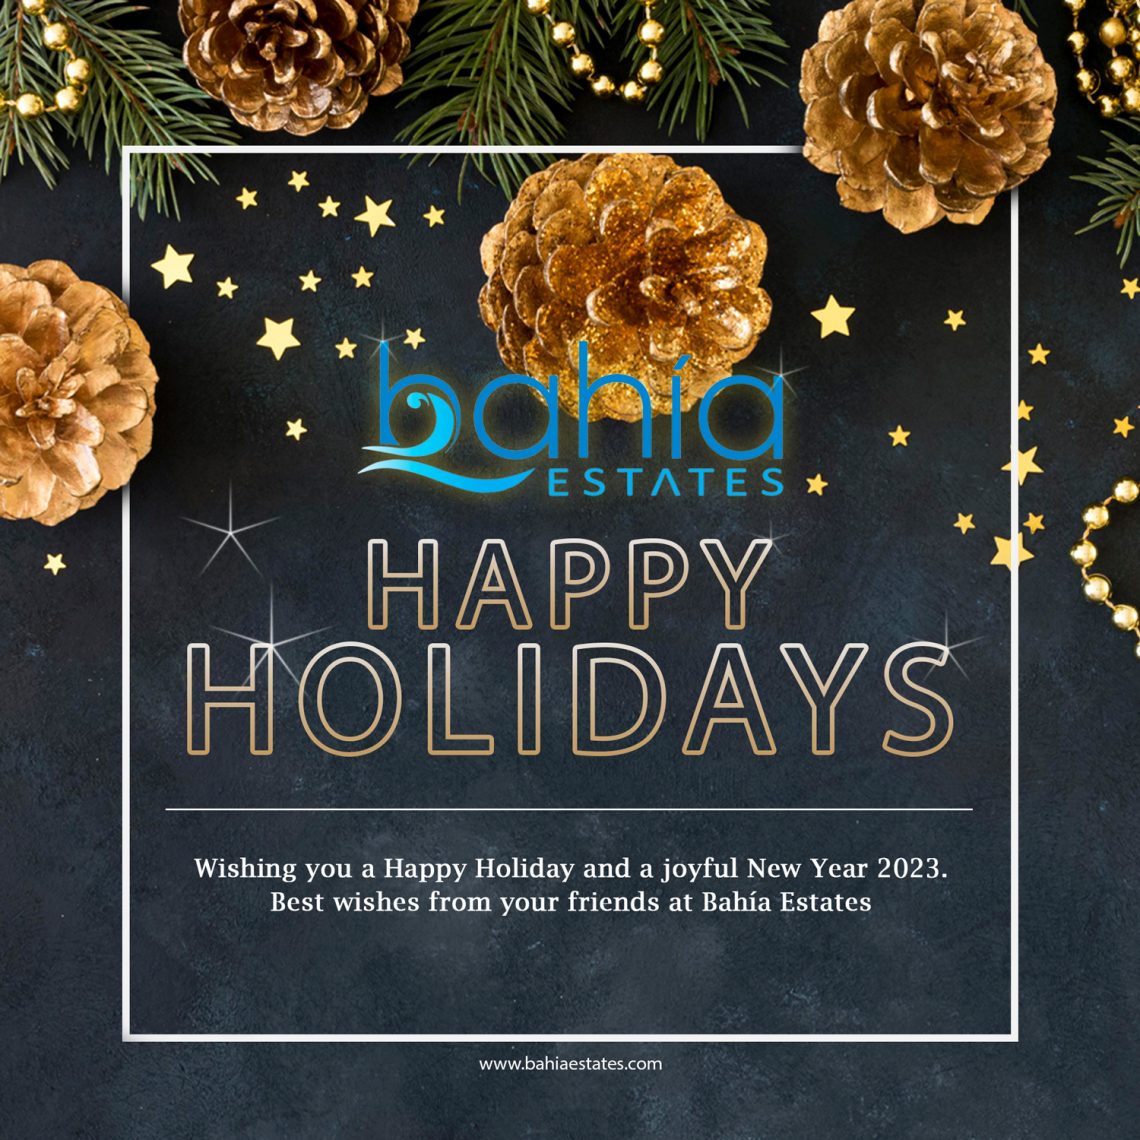 Wishing you a Happy Holiday and a joyful New Year 2023. Best wishes from your friends at Bahía Estates